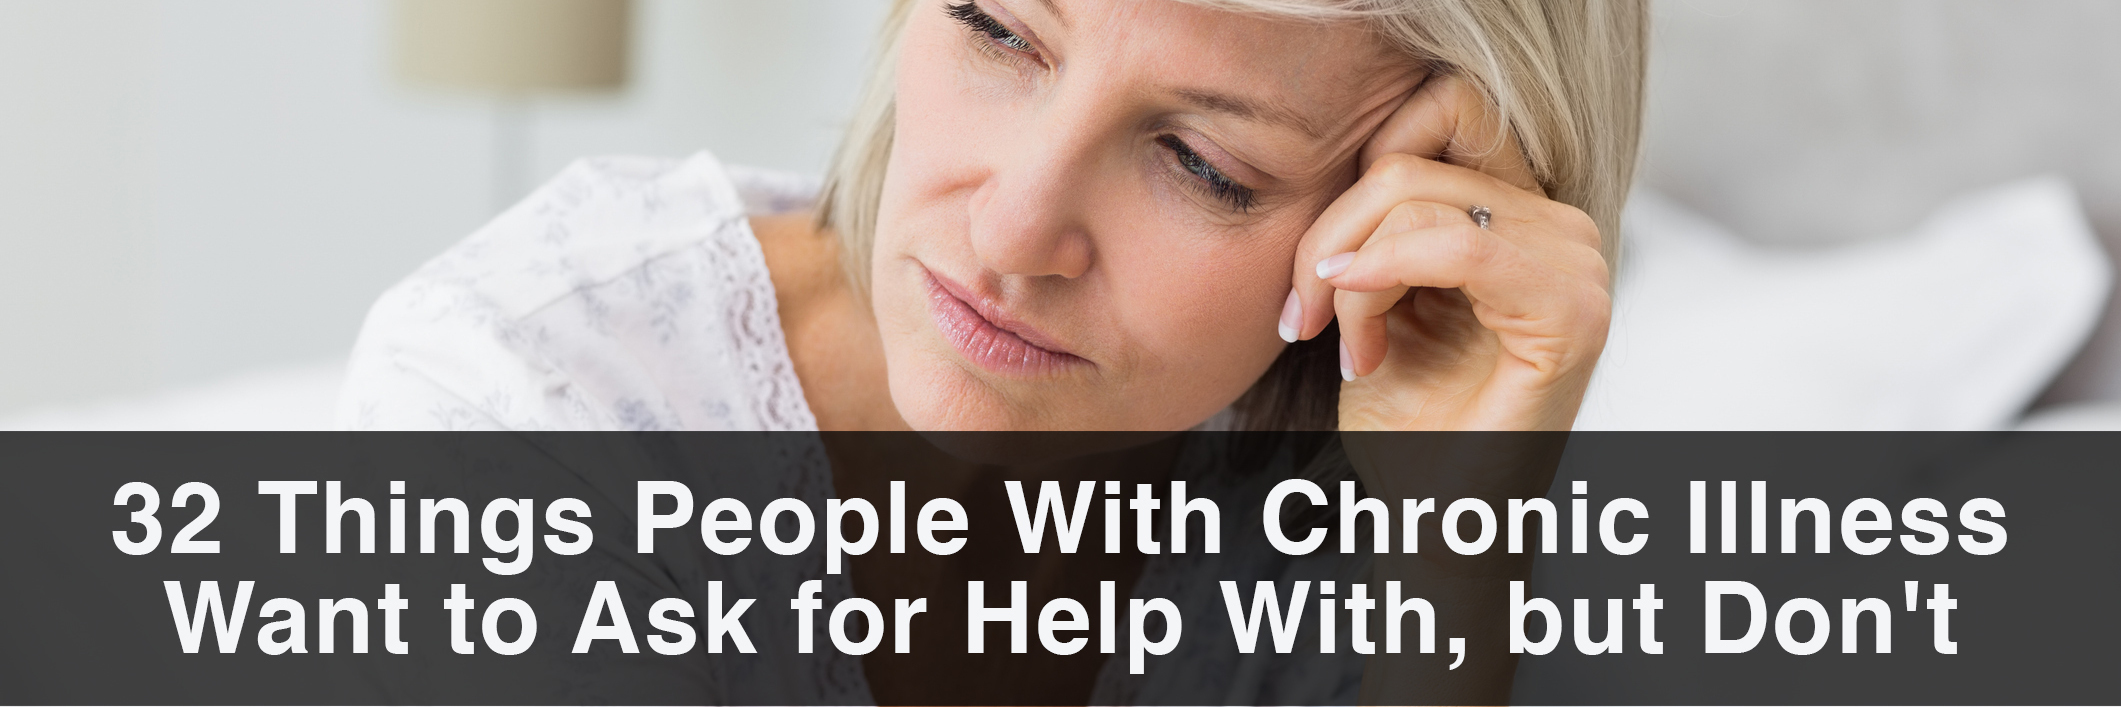 32 things people with chronic illness want to ask for help with, but don't